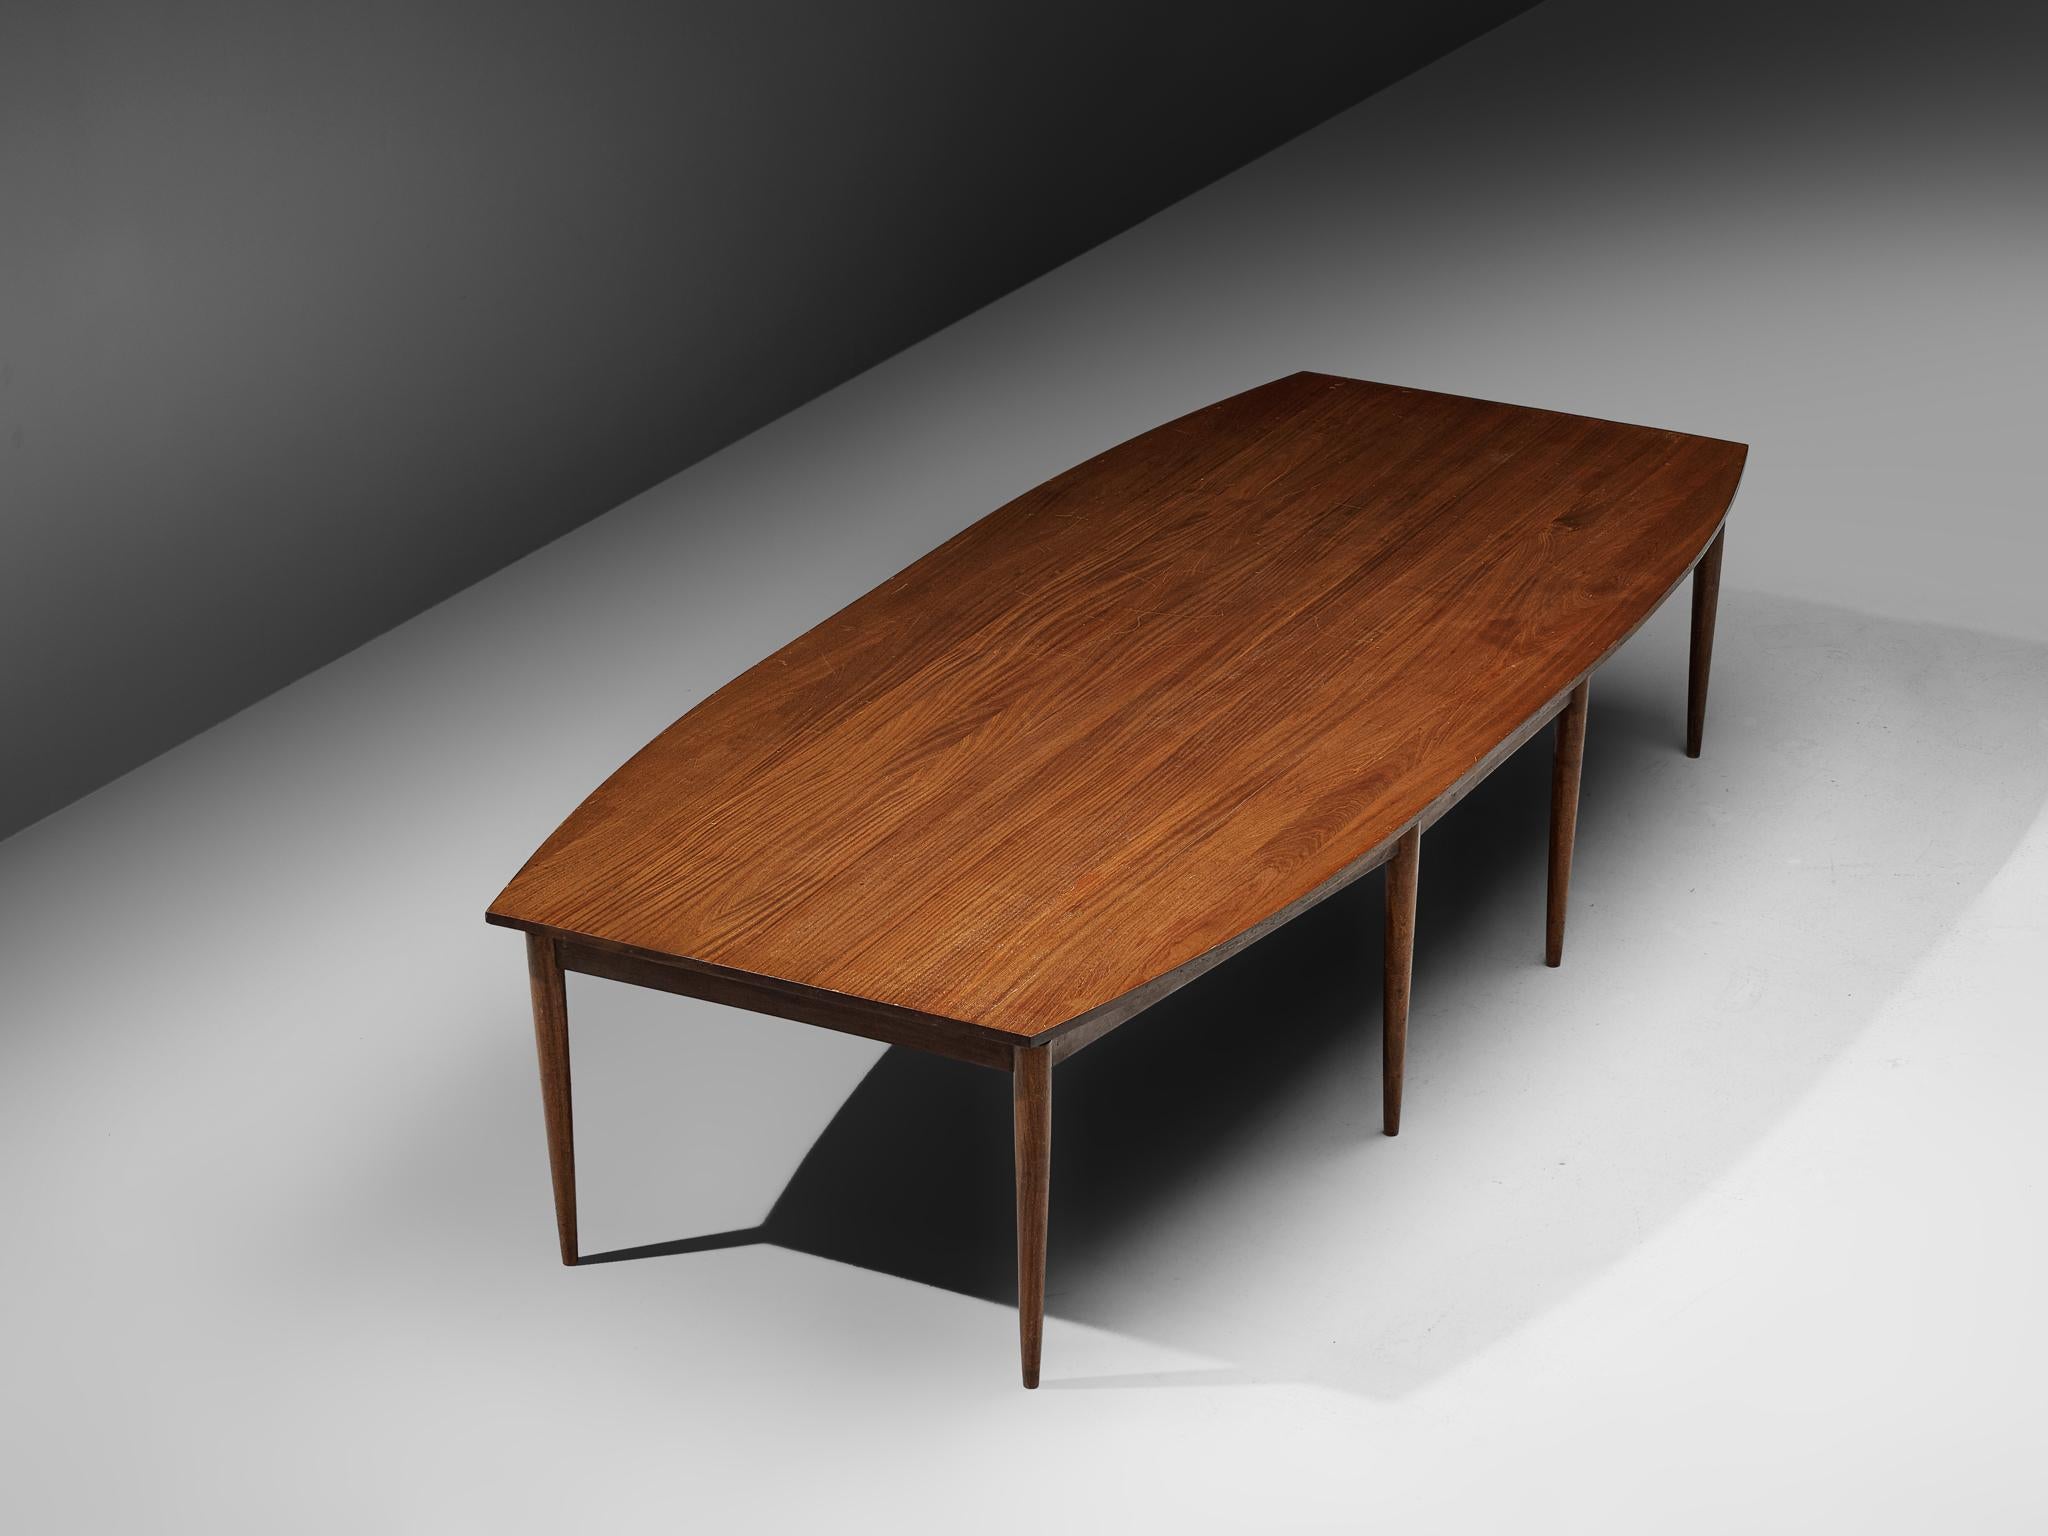 Conference table or dining, mahogany, Denmark, 1960s.

A large dining or conference table in mahogany with an extraordinary length of 3.6mtr/140in. The boat-shaped table top is made of one piece of wood, featuring a beautiful mahogany grain. The